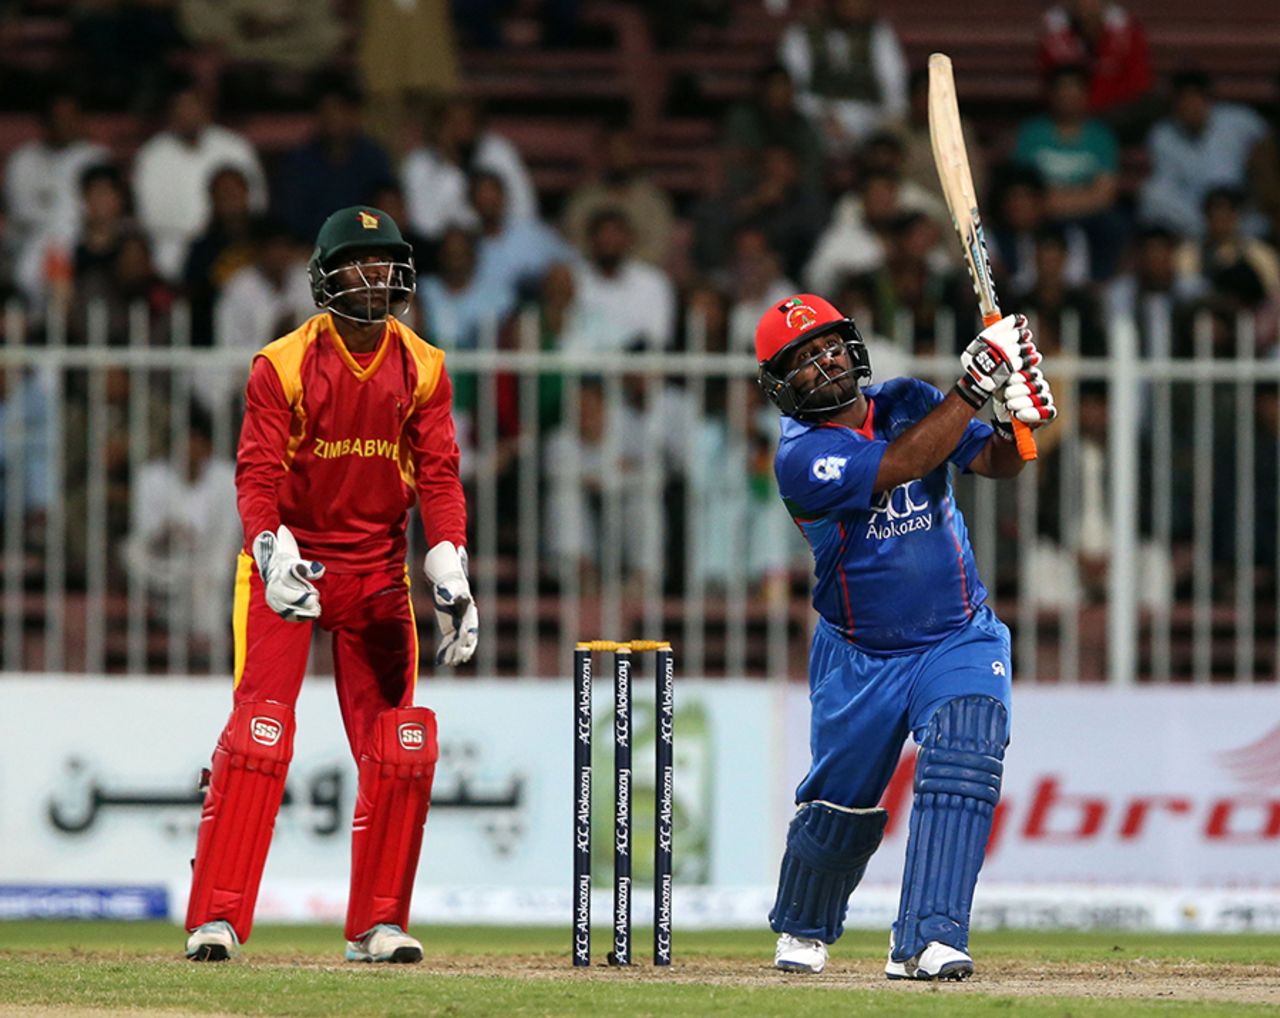 Mohammad Shahzad plays a lofted shot down the ground, Afghanistan v Zimbabwe, 2nd ODI, Sharjah, December 29, 2015